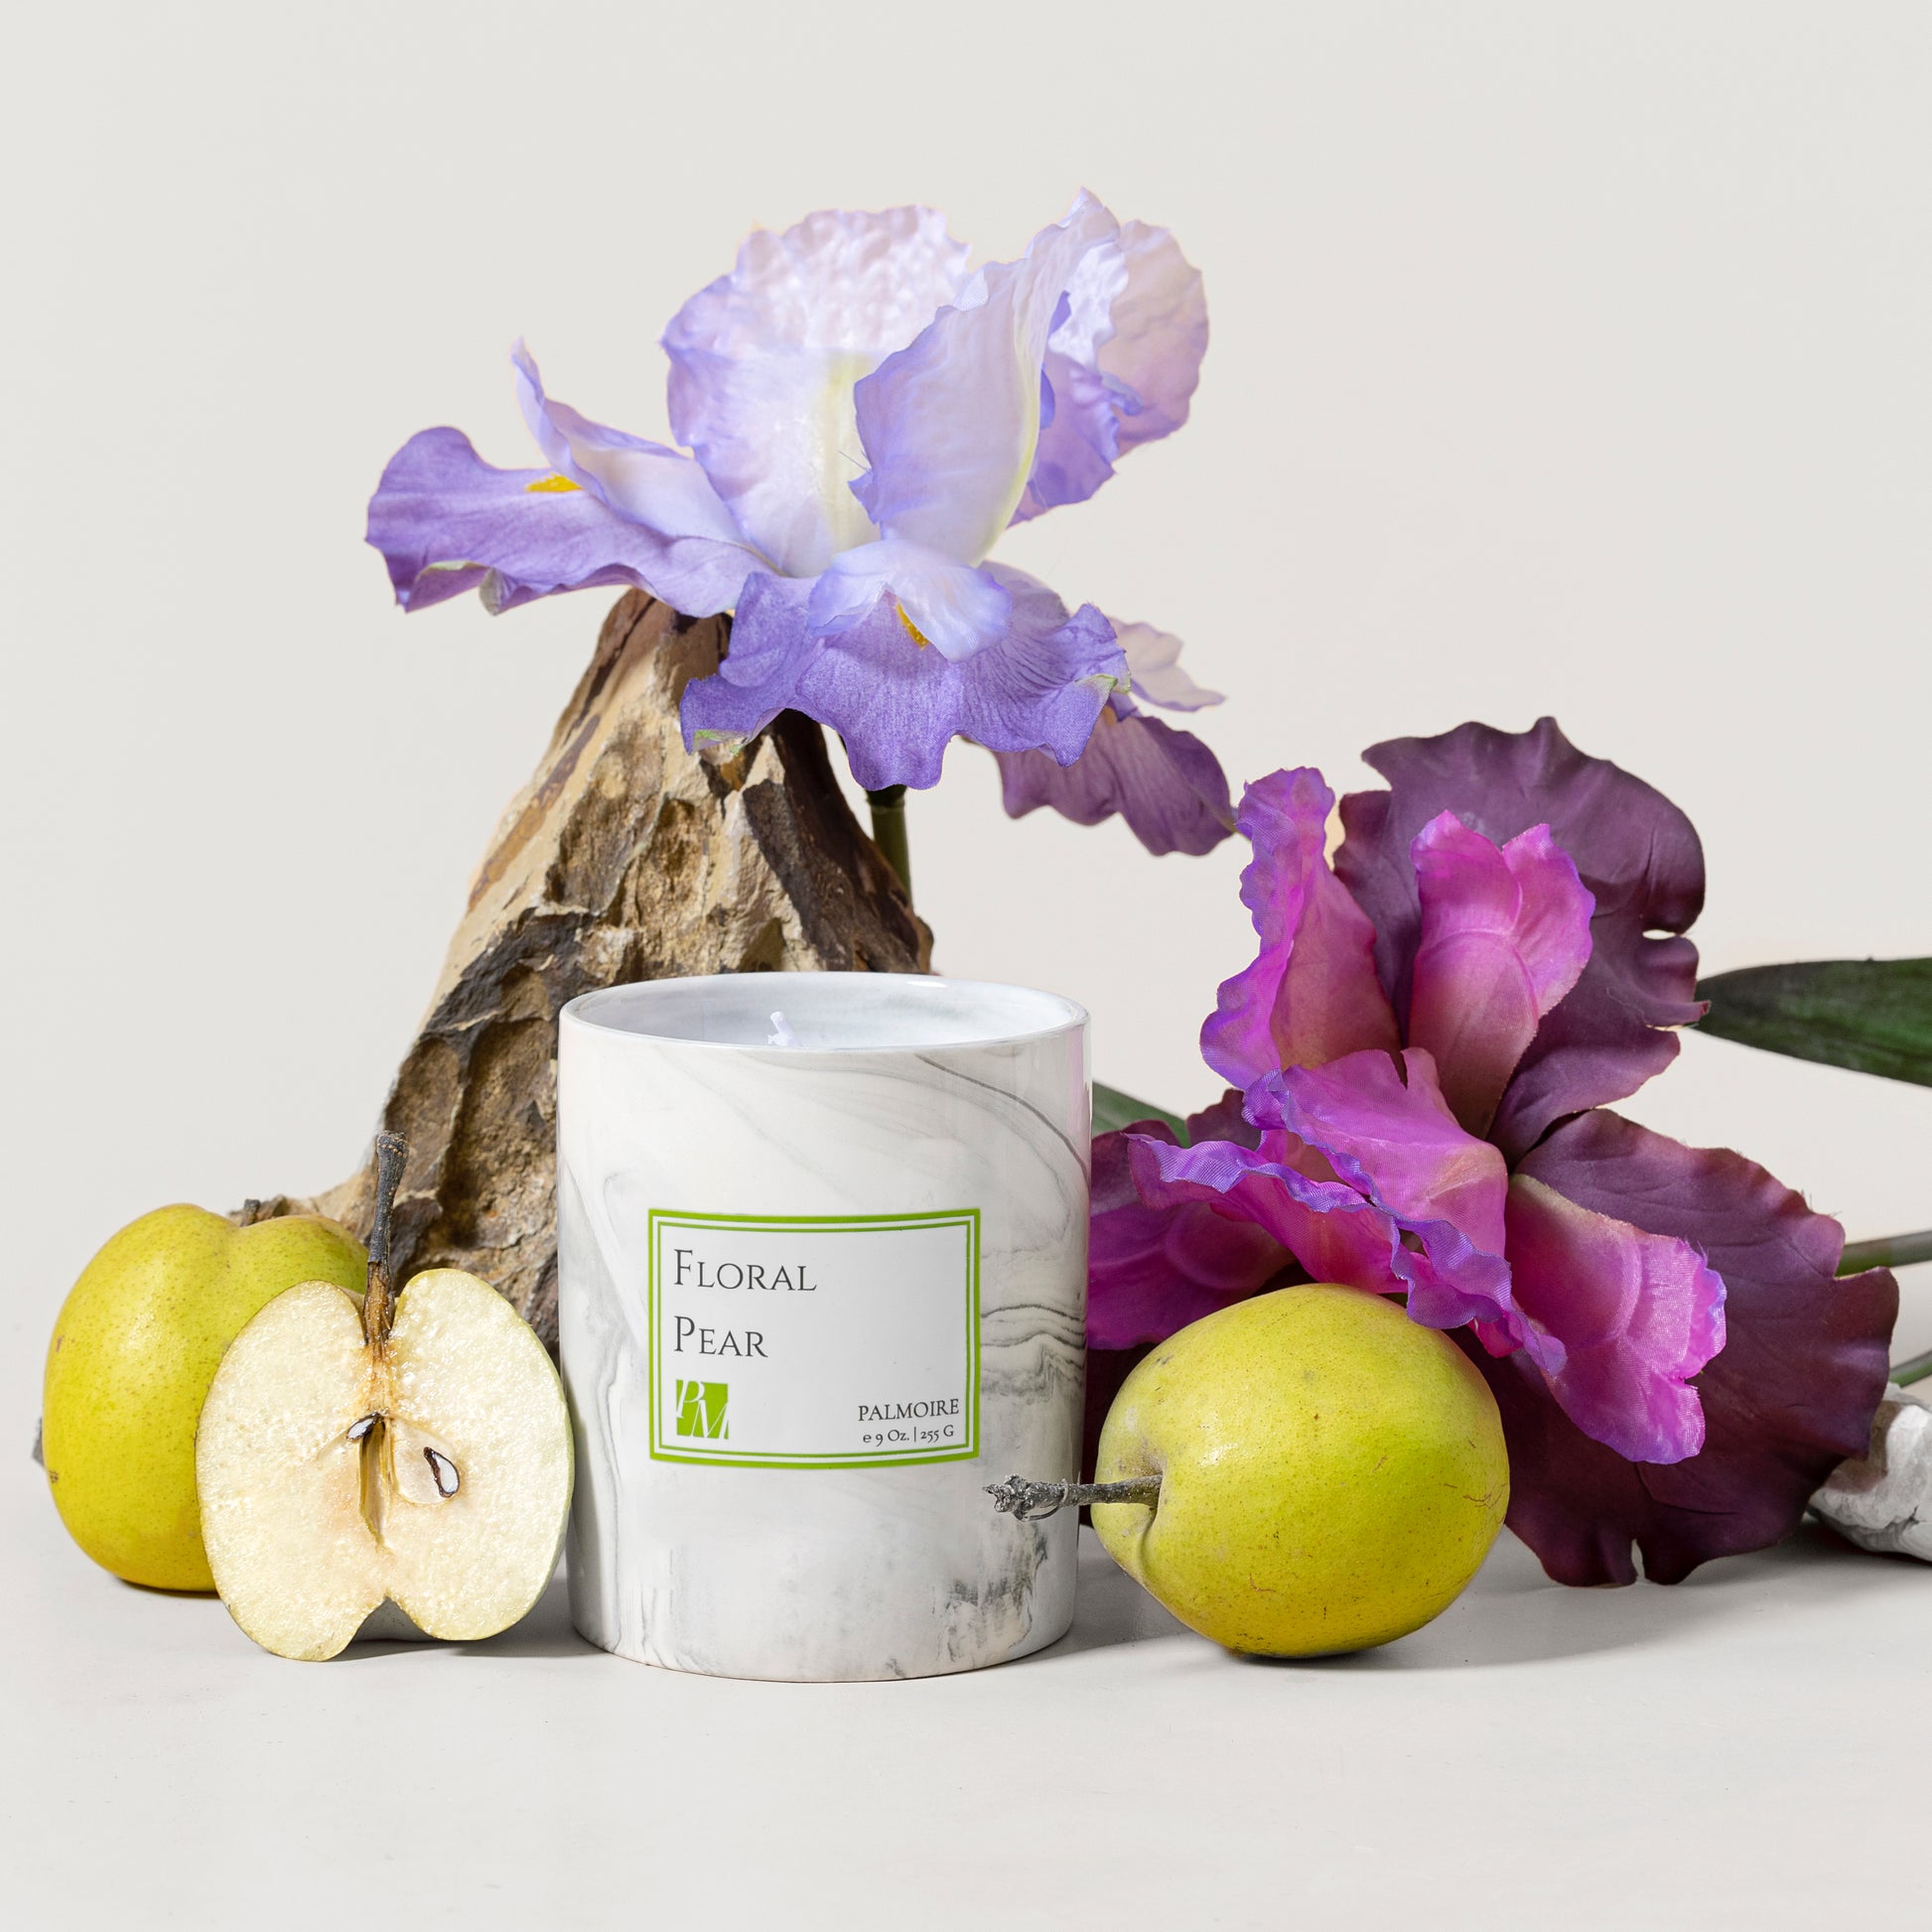 Floral Pear Soy Wax Candle - PALMOIRE